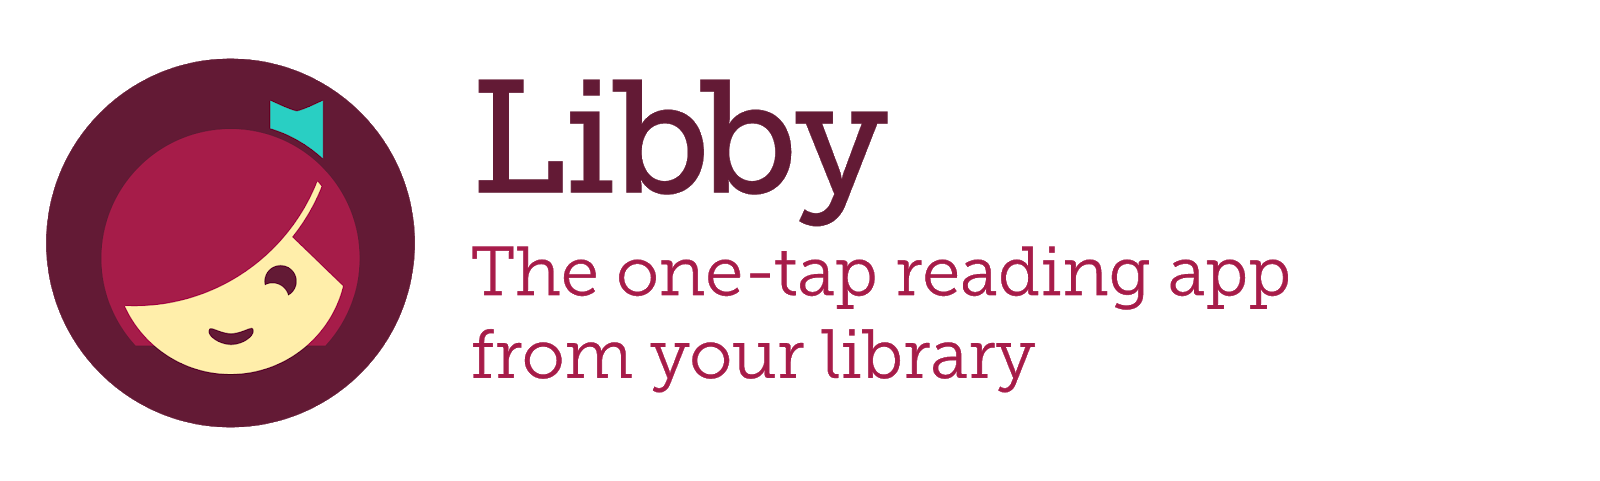 Libby The one tap reading app from your library